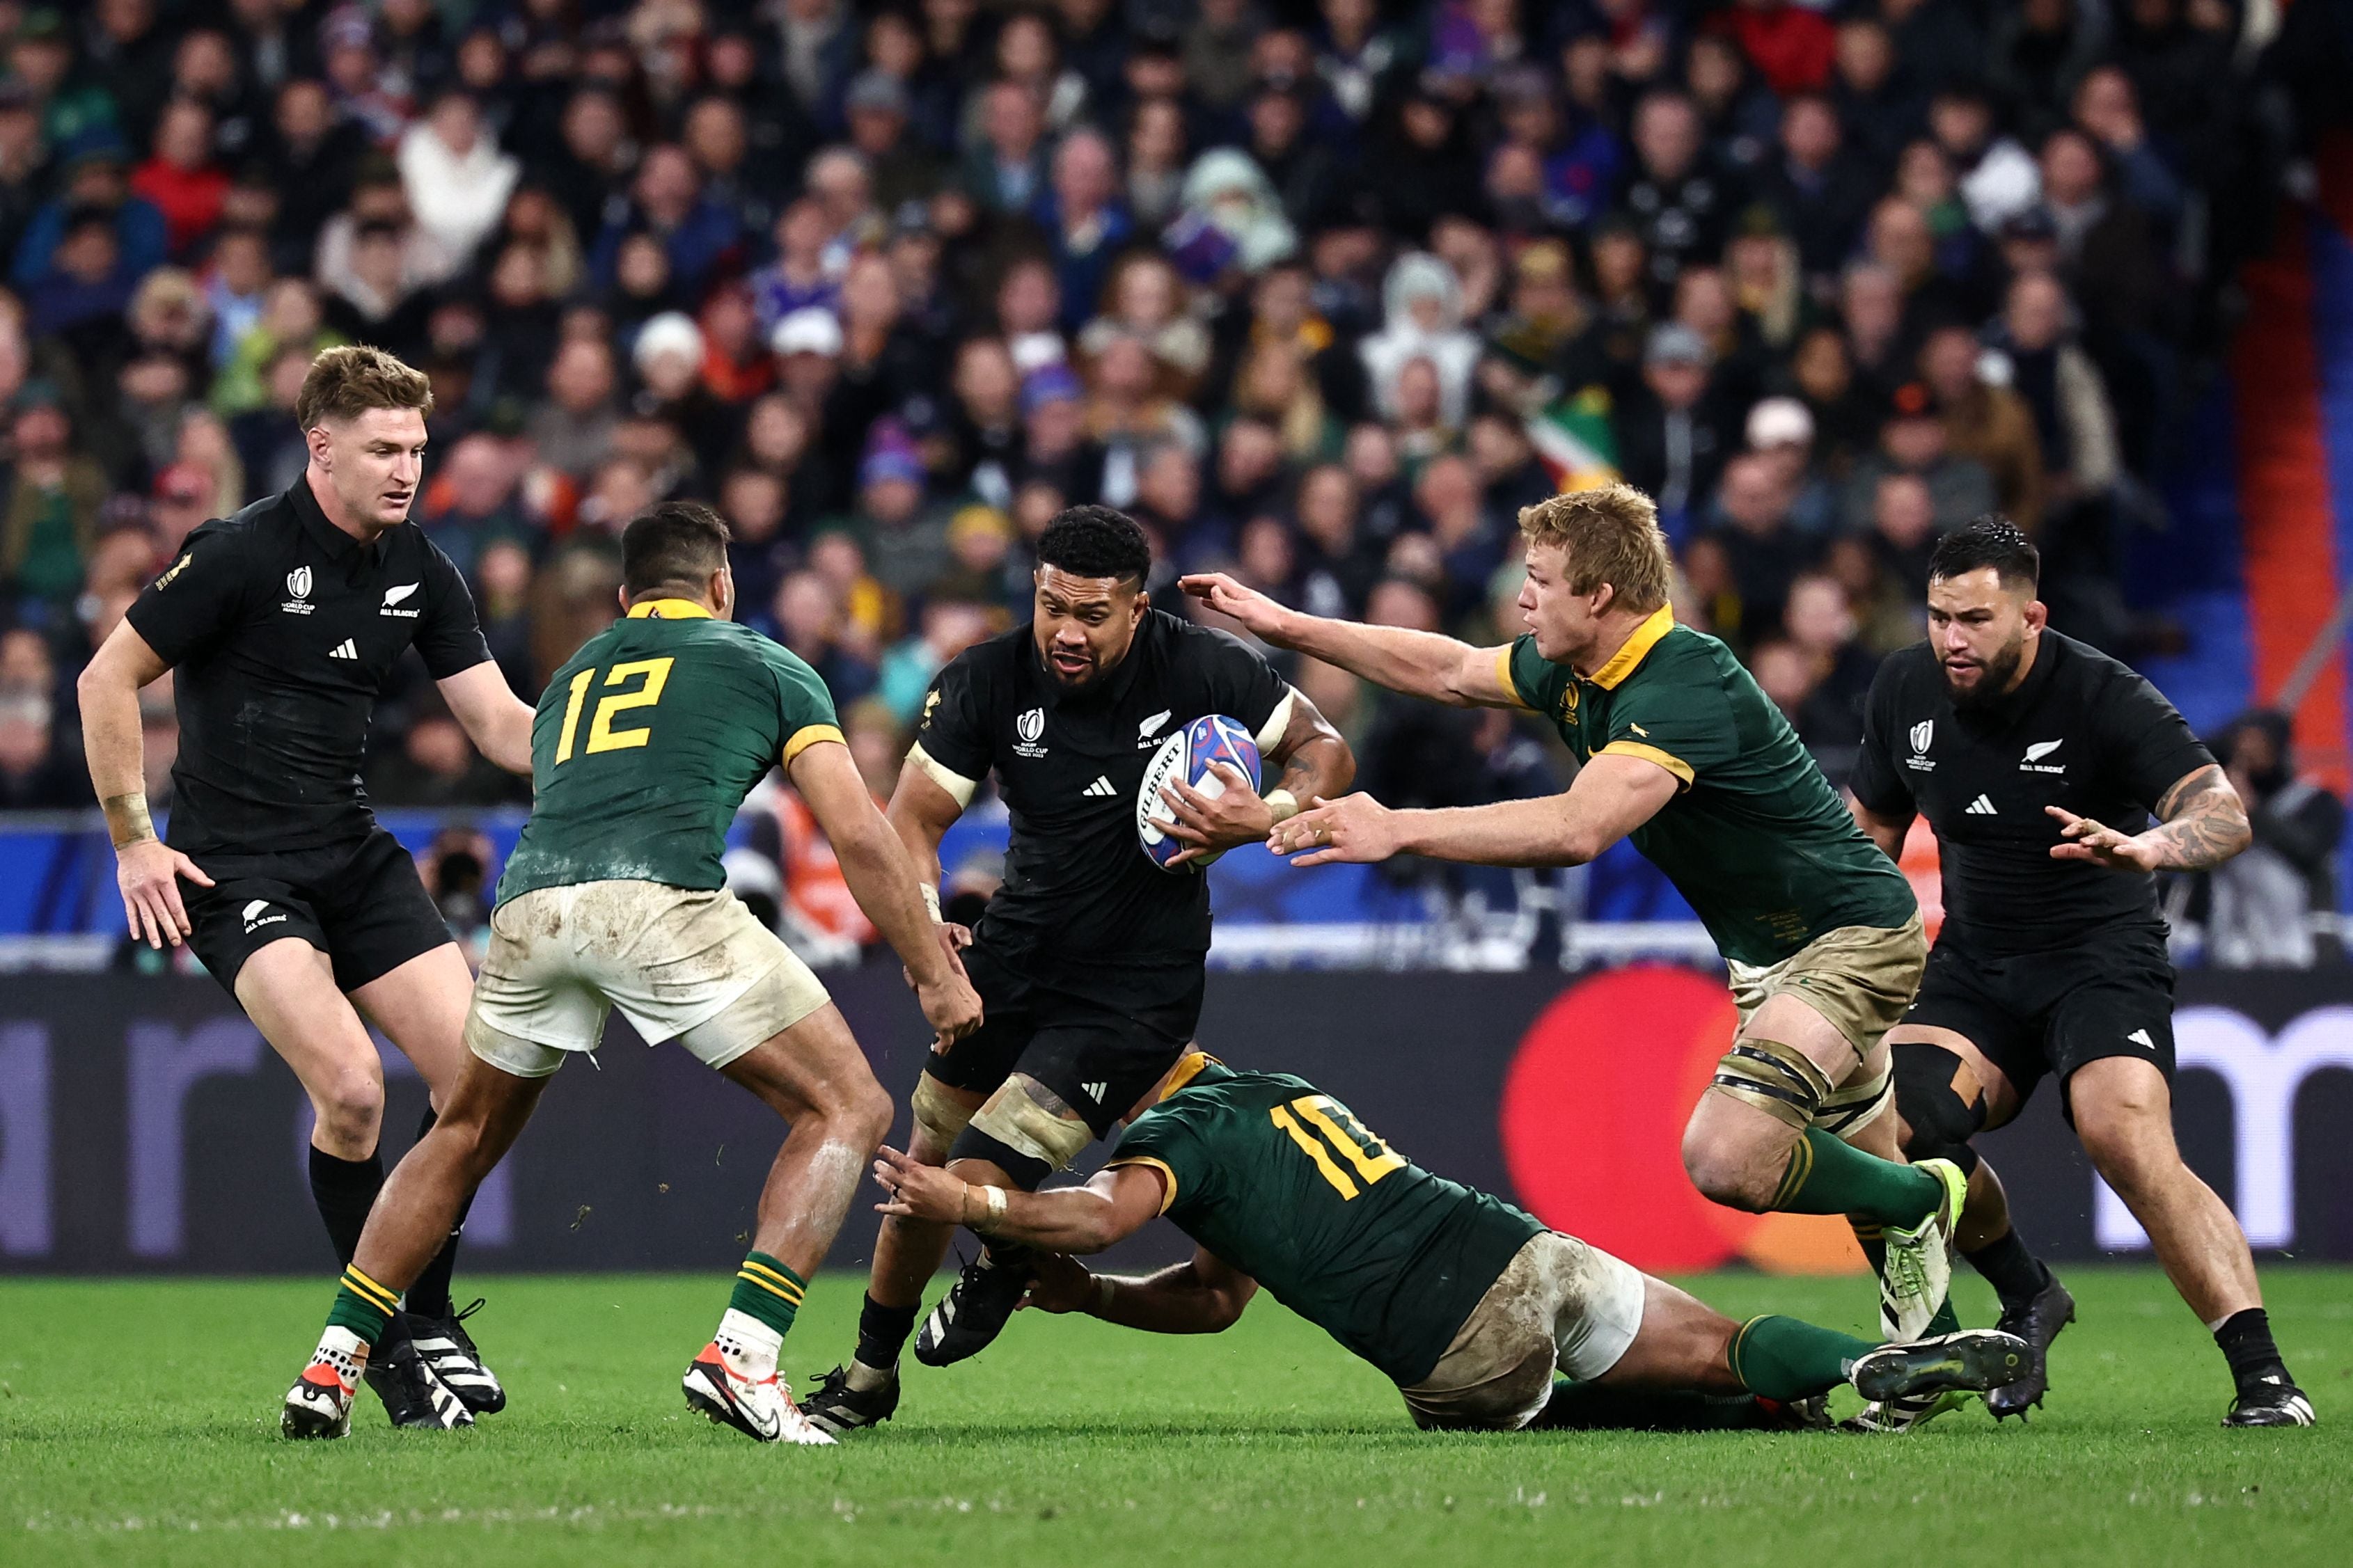 New Zealand’s number eight Ardie Savea is tackled by South Africa’s fly-half Handre Pollard